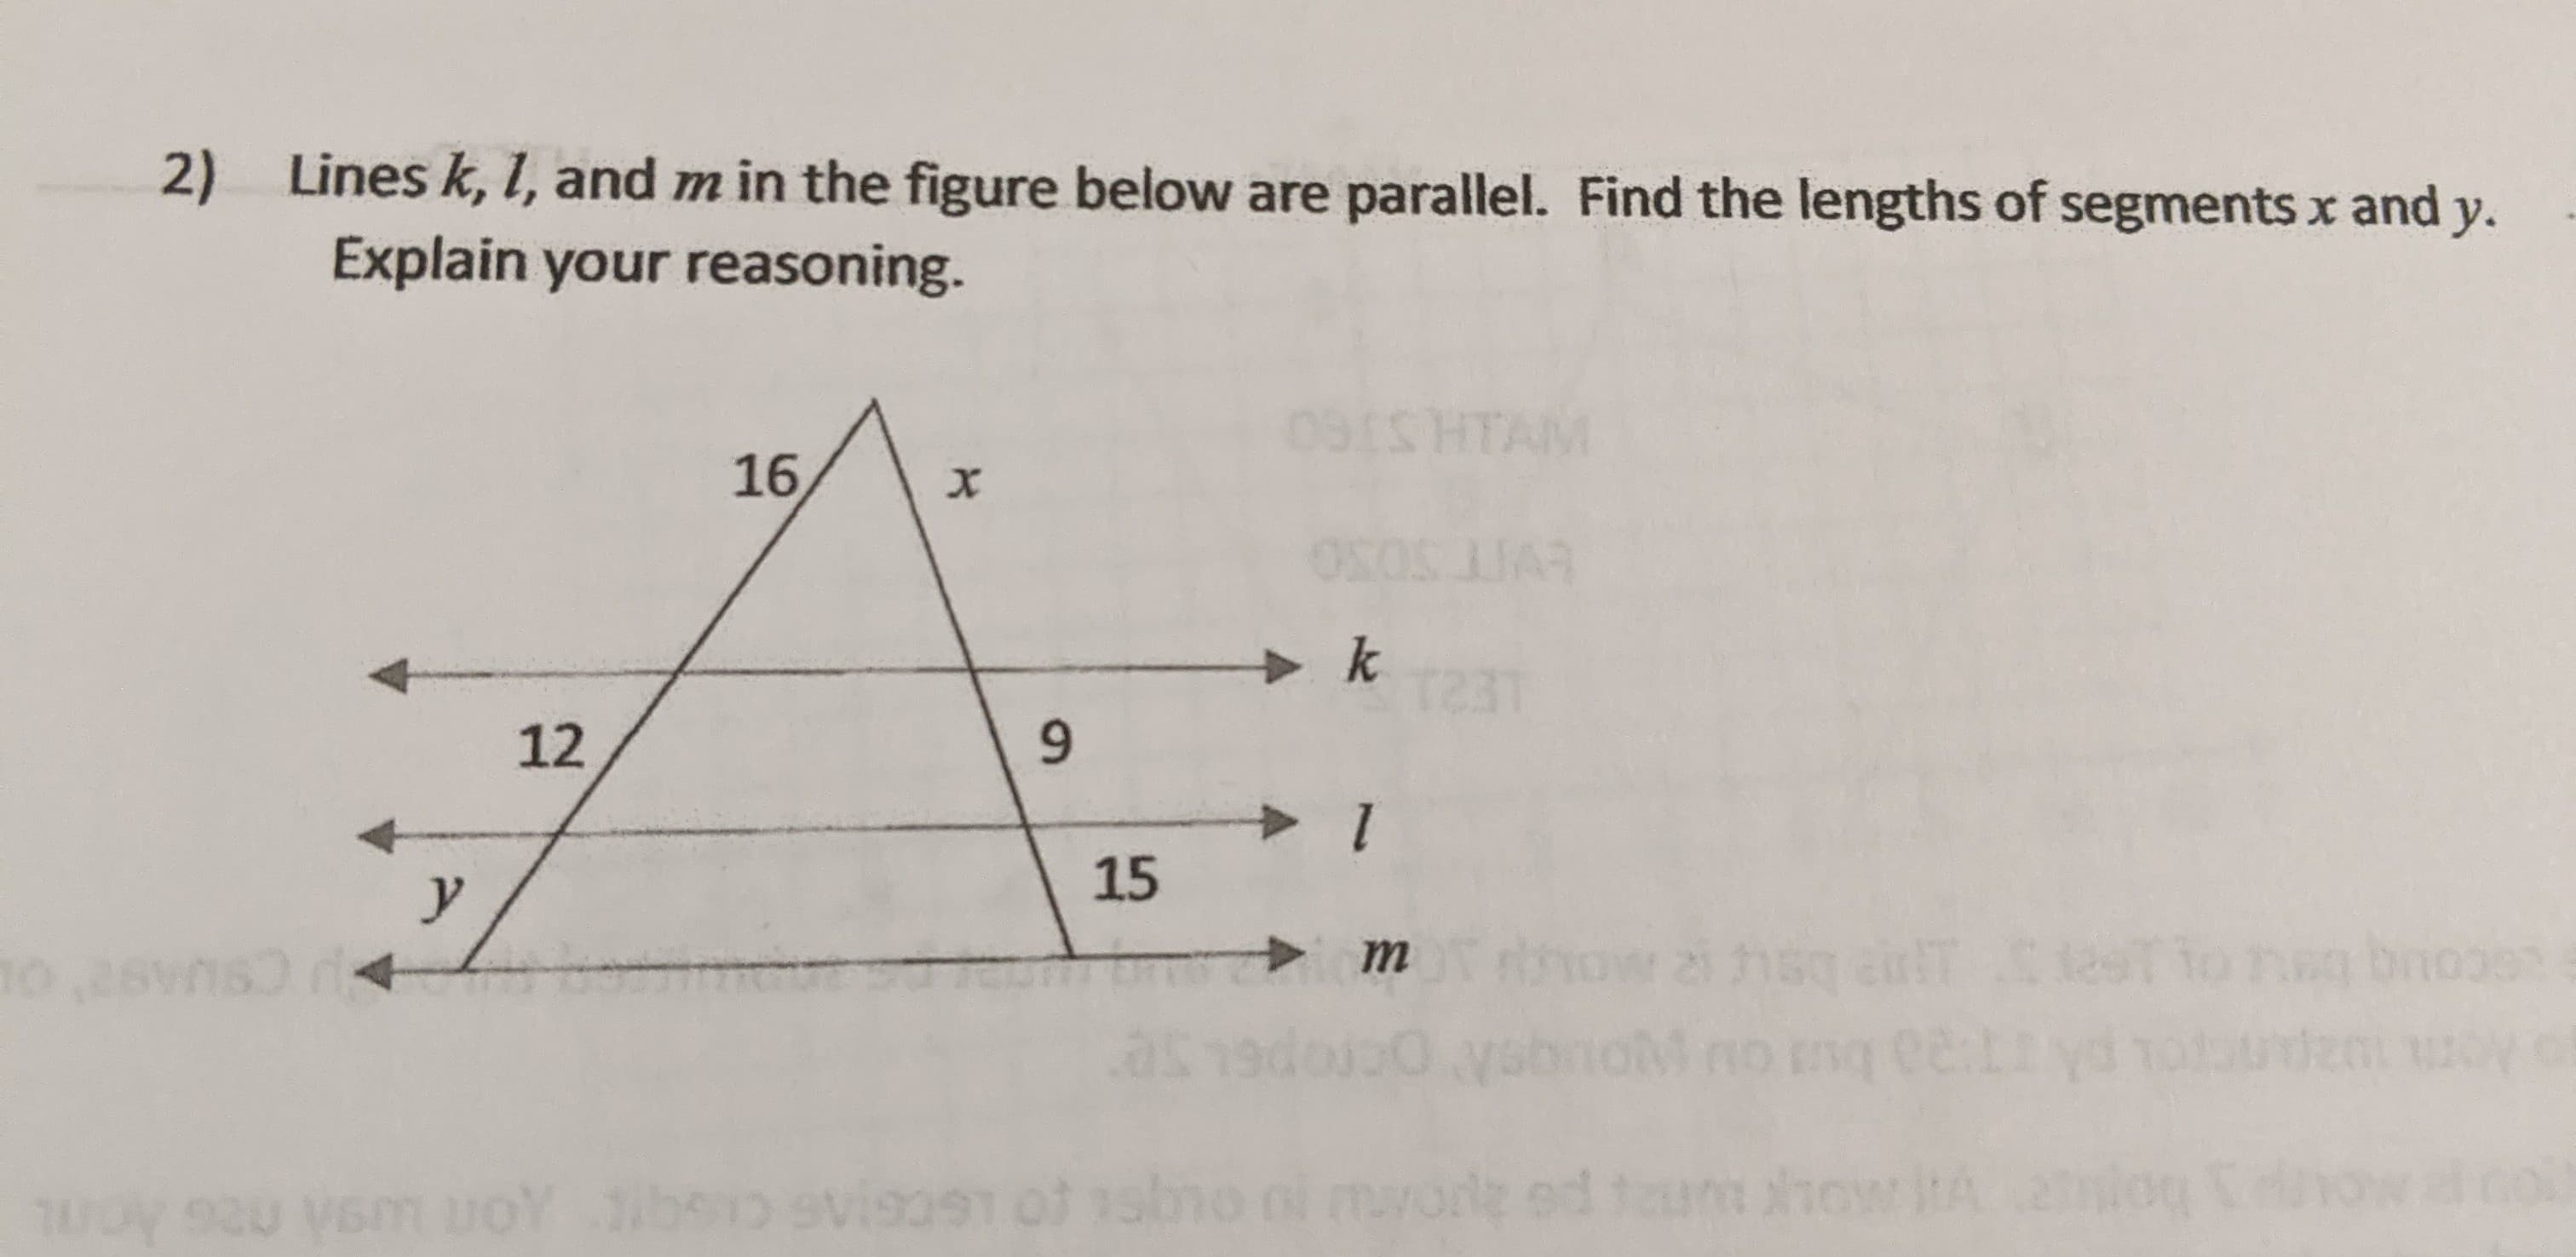 2) Lines k, 1, and m in the figure below are parallel. Find the lengths of segments x and y.
Explain your reasoning.
091S HTAM
16
k
T231
12
15
m
tnow 2i he
